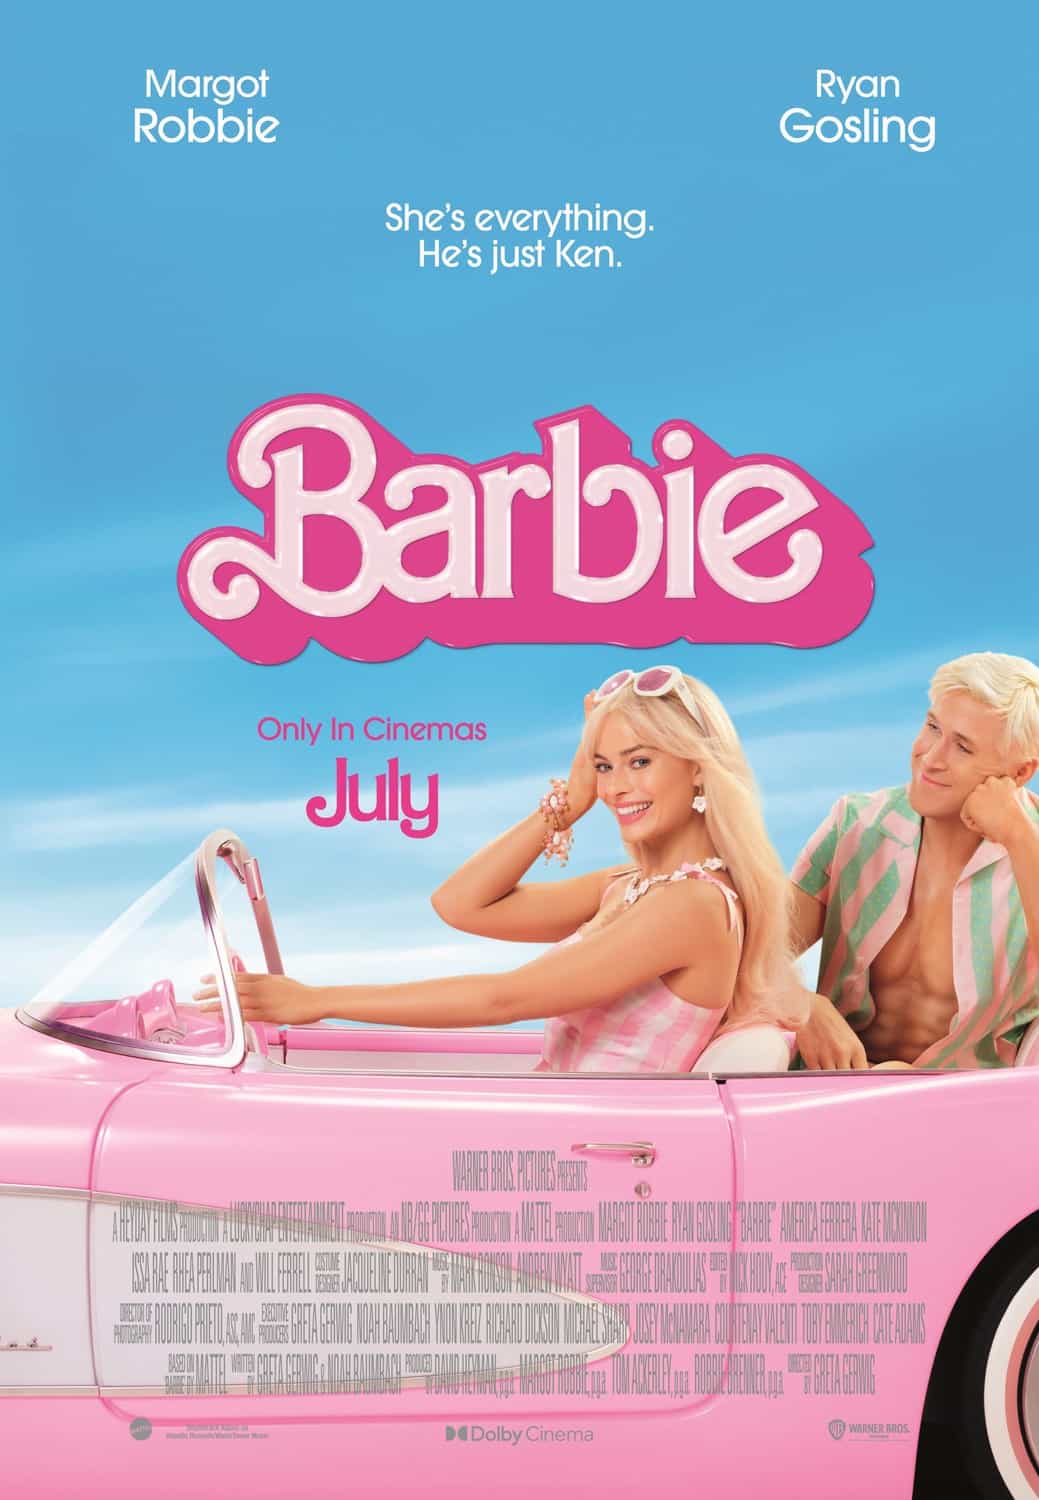 Barbie is given a 12A age rating in the UK for moderate innuendo, brief sexual harassment, implied strong language